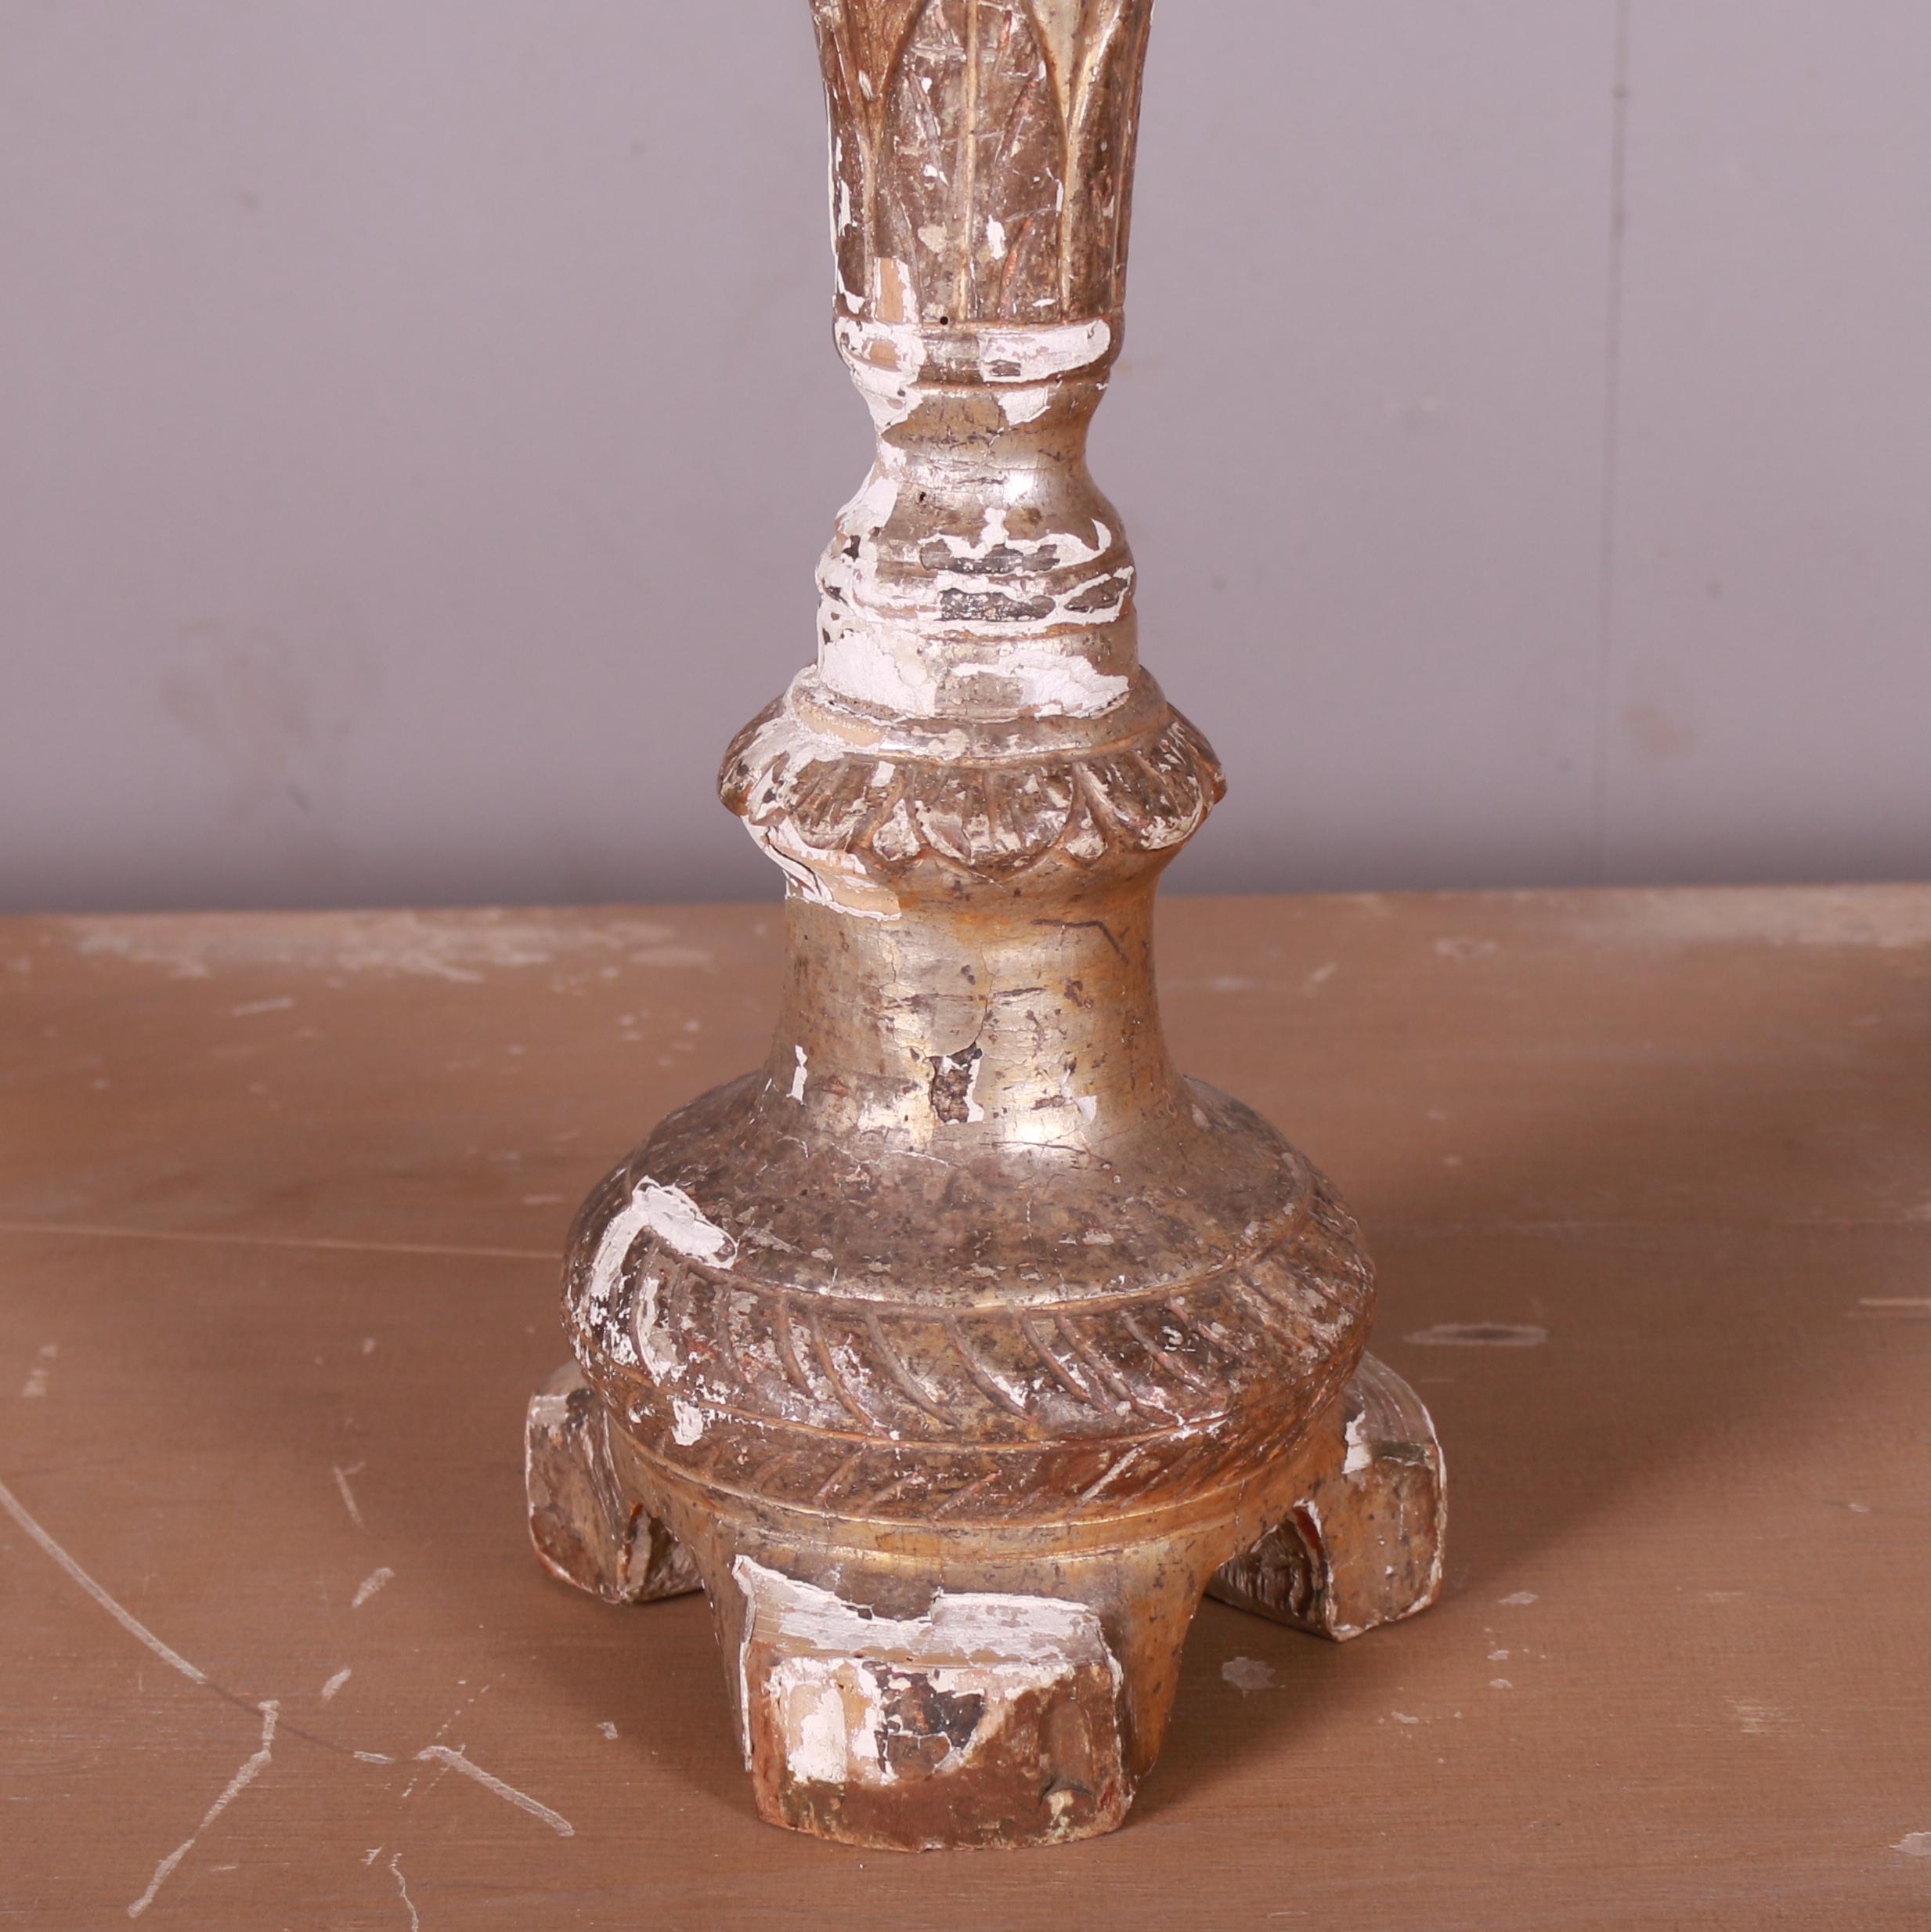 Late 19th C Italian giltwood candle holder. 1890.

Reference: 7379

Dimensions
24.5 inches (62 cms) High
6.5 inches (17 cms) Diameter.